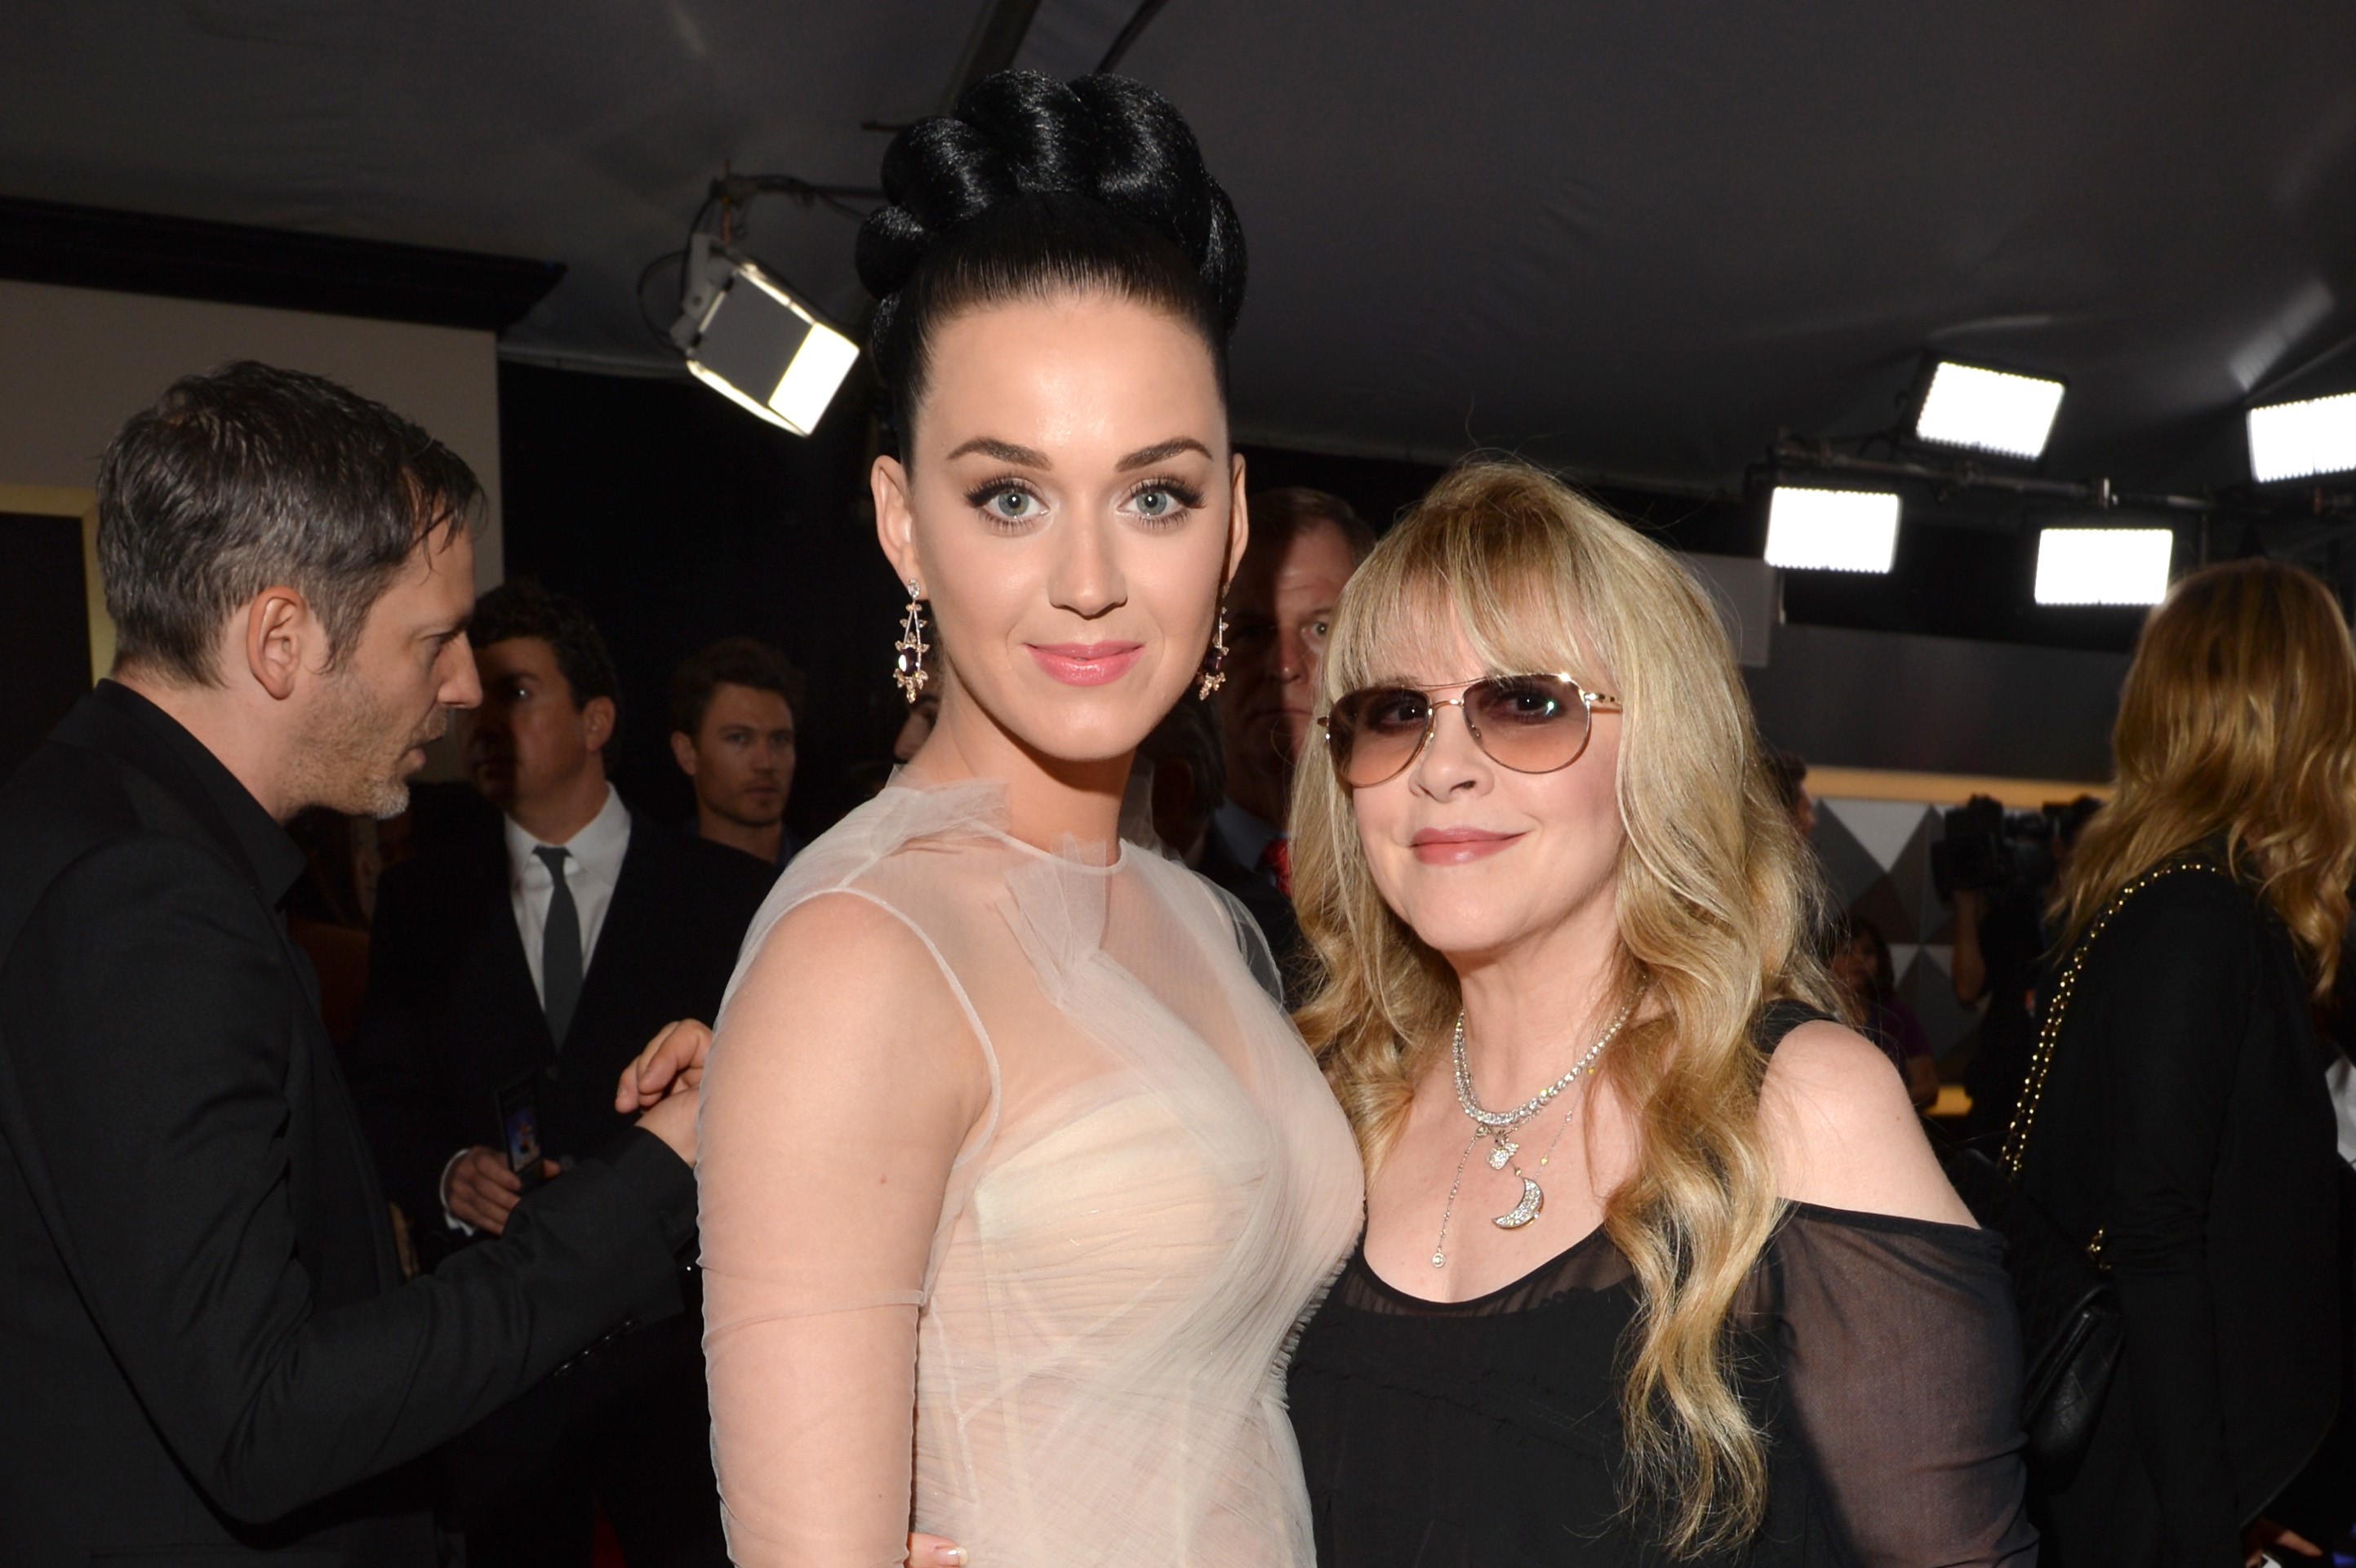 Katy Perry wears a white dress and stands next to Stevie Nicks who wears a black dress and sunglasses.